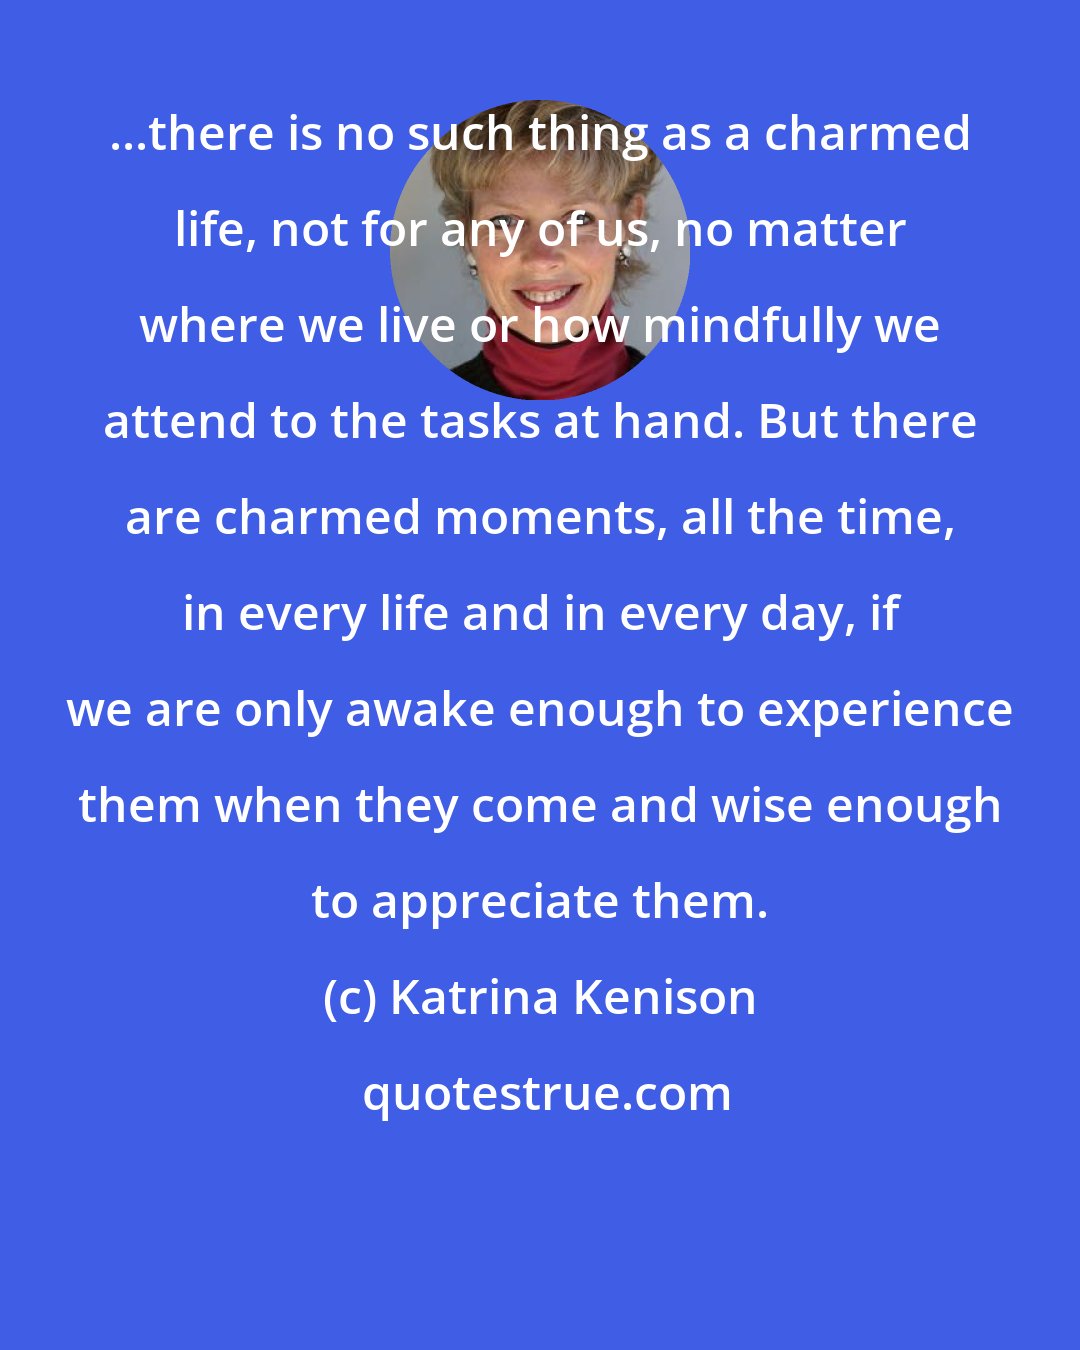 Katrina Kenison: ...there is no such thing as a charmed life, not for any of us, no matter where we live or how mindfully we attend to the tasks at hand. But there are charmed moments, all the time, in every life and in every day, if we are only awake enough to experience them when they come and wise enough to appreciate them.